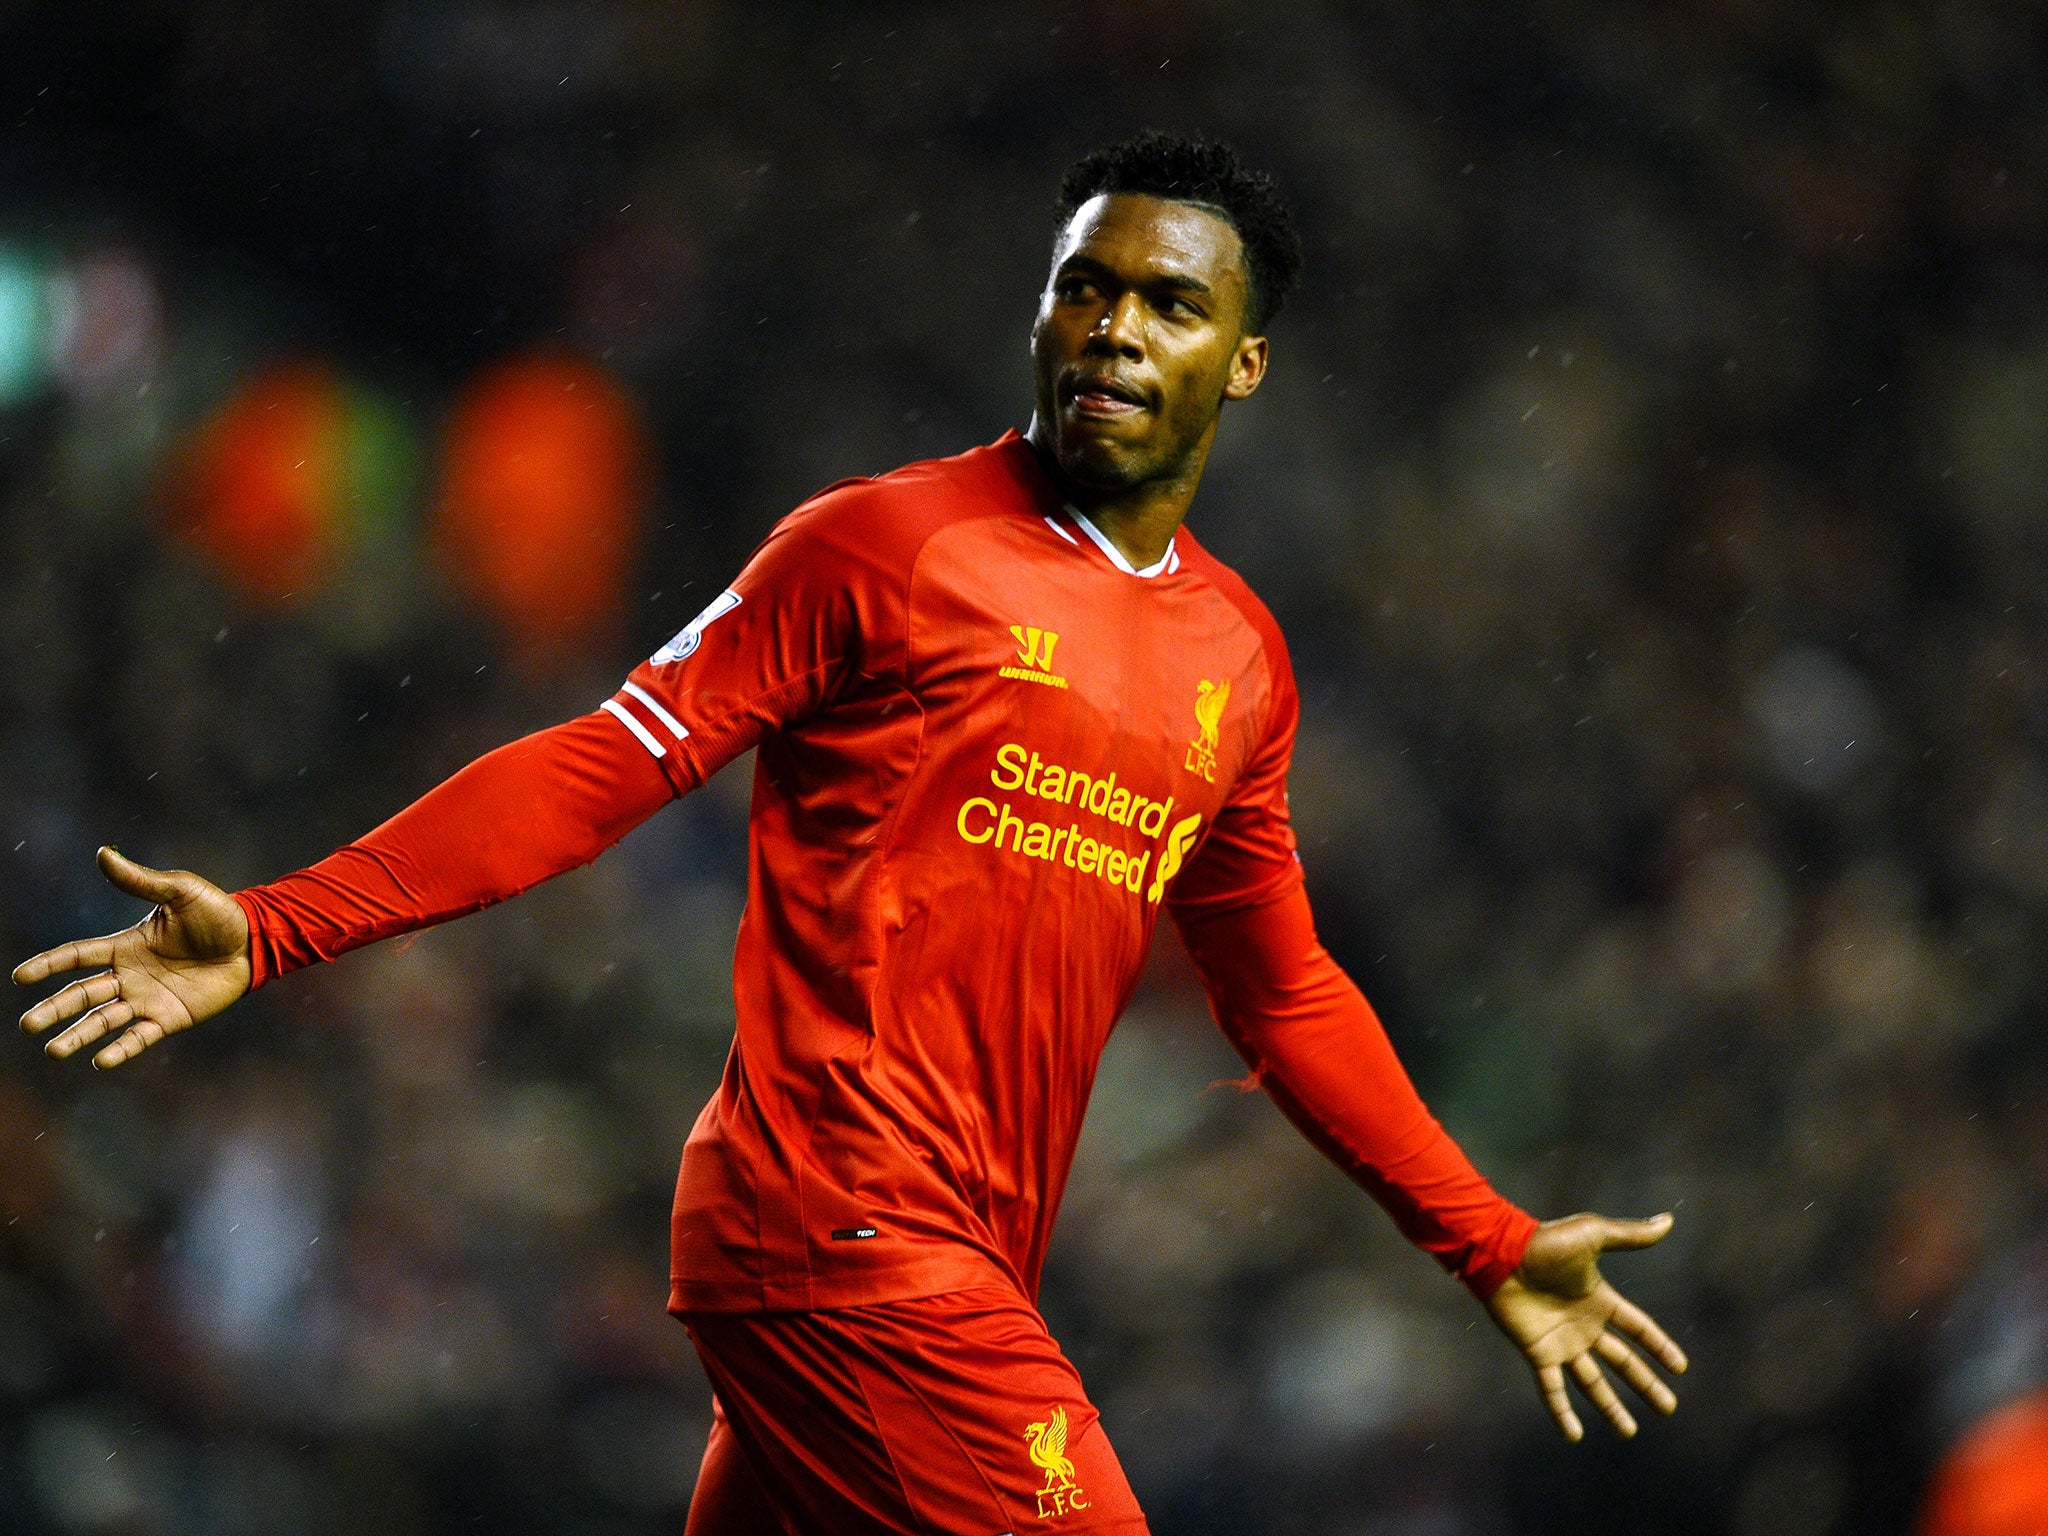 Daniel Sturridge has only played three times for Liverpool this season